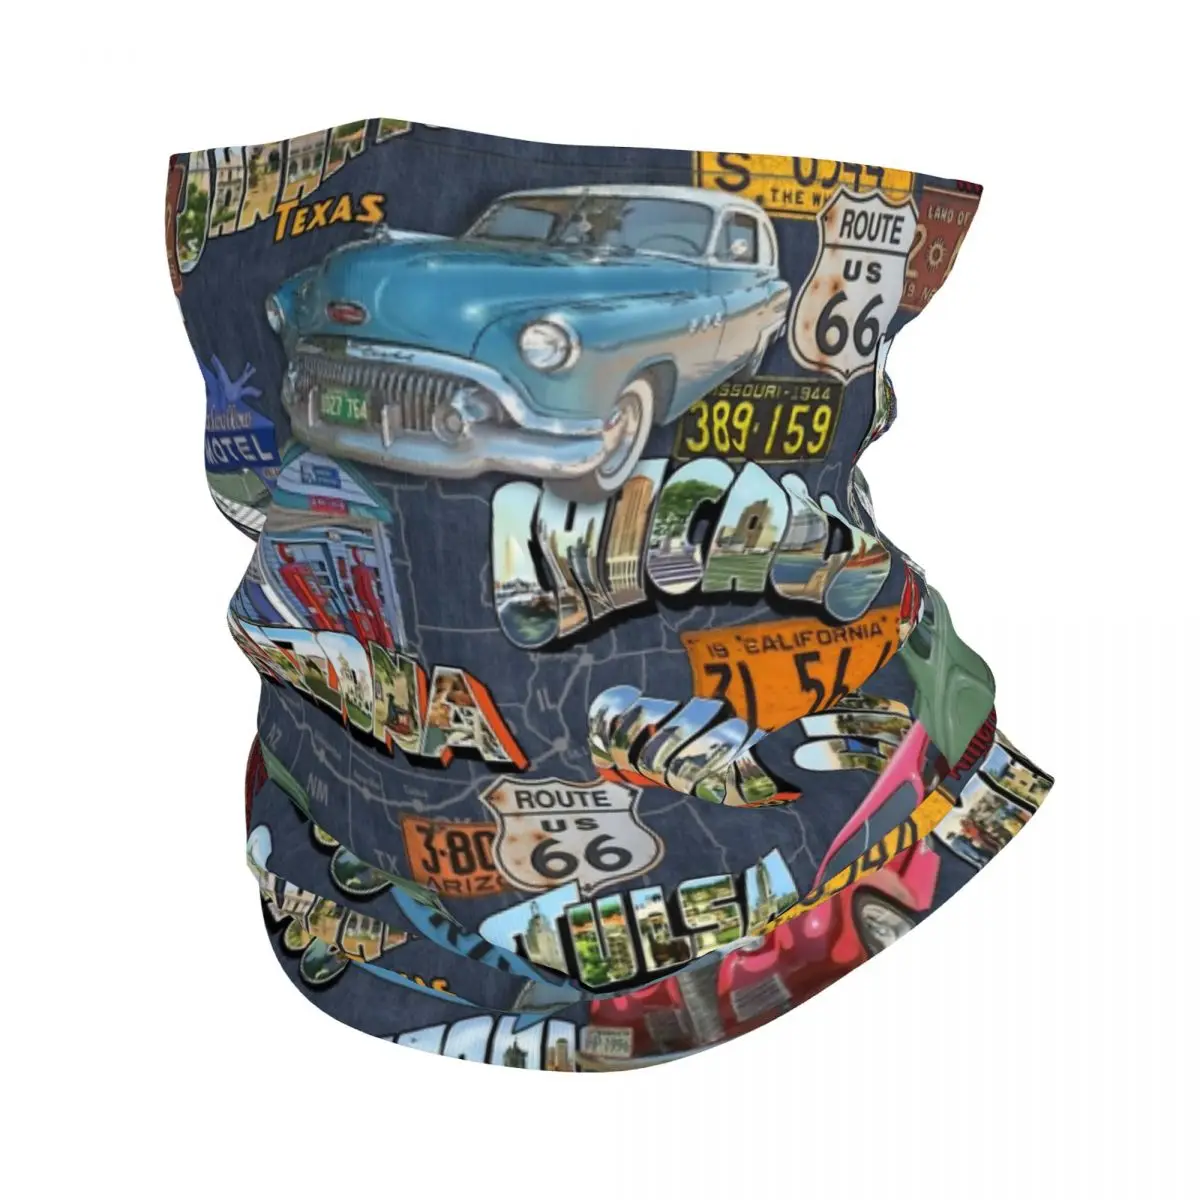 

America Travel Bandana Neck Gaiter Printed The Route 66 Mask Scarf Multi-use Headwear Cycling for Men Women Adult All Season